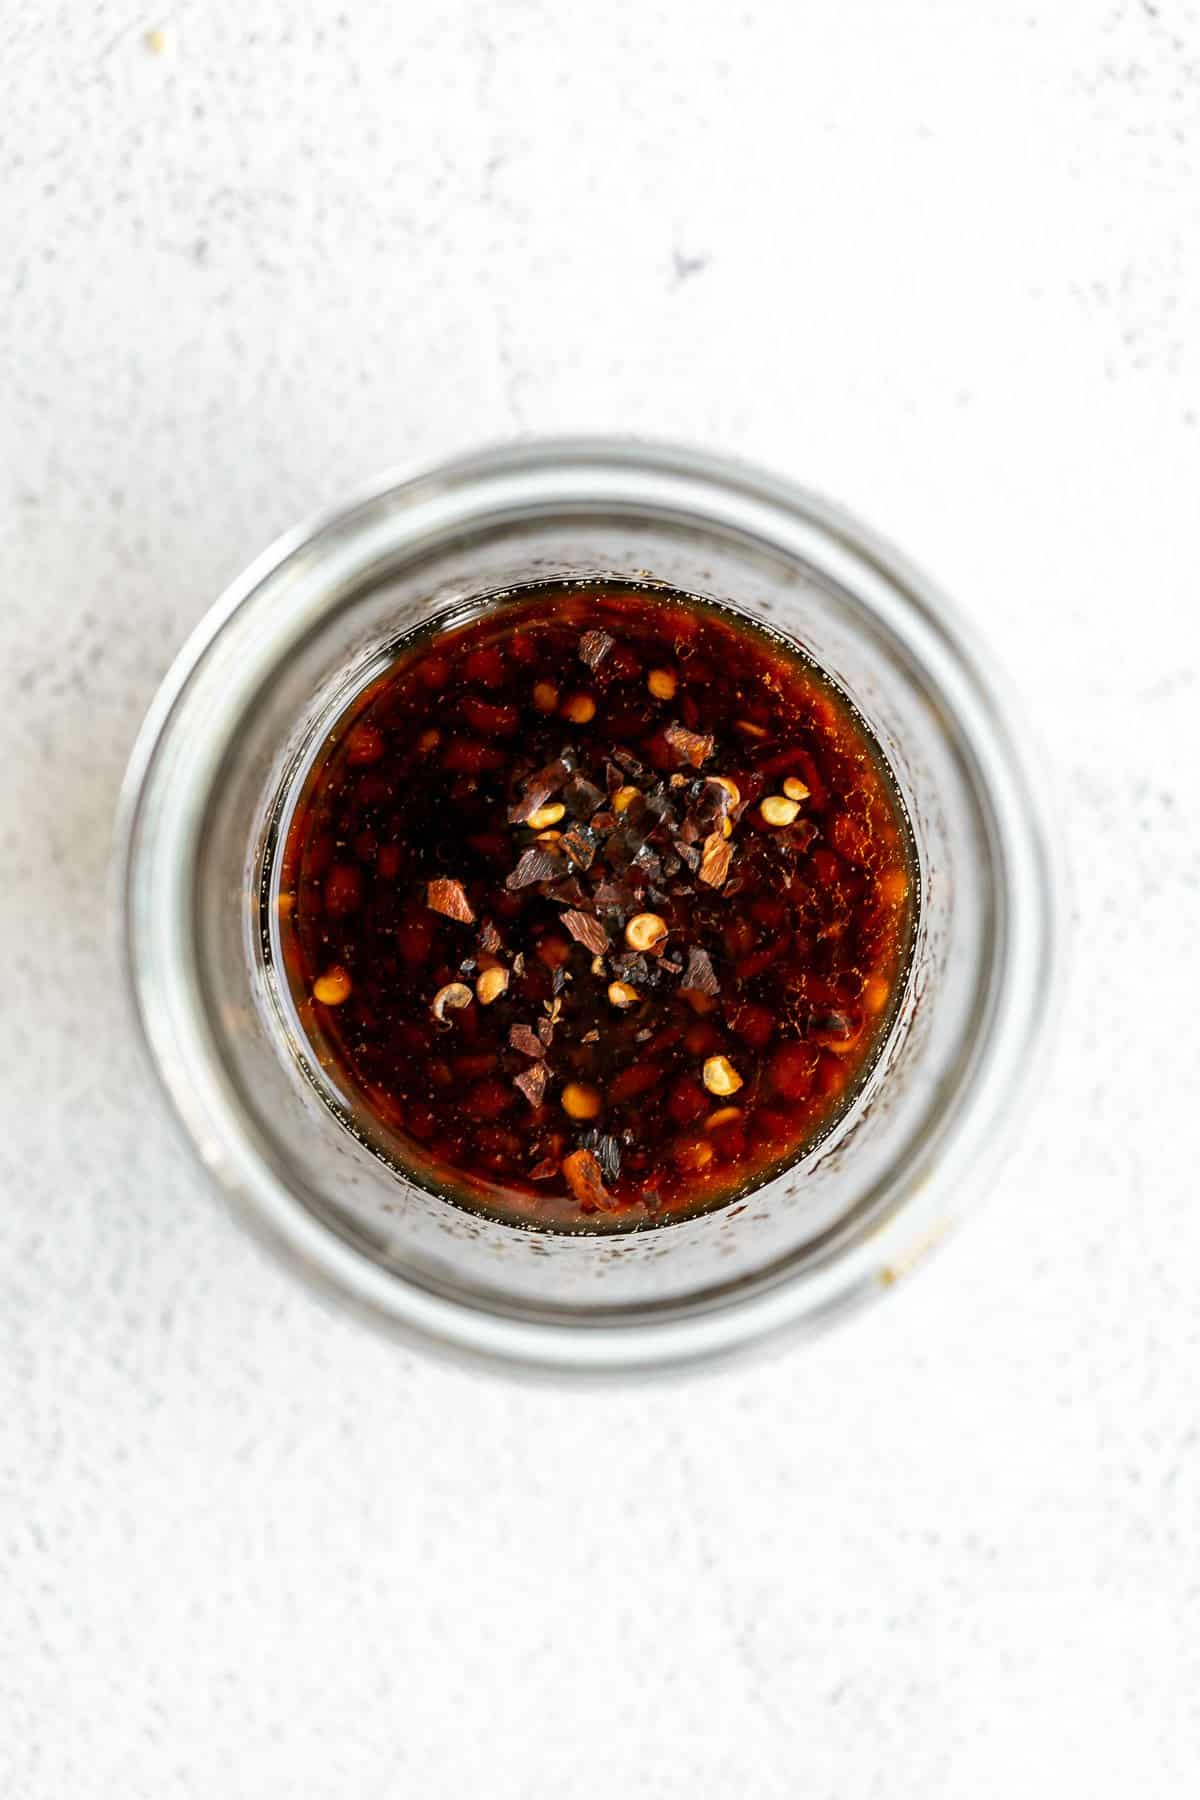 sauce for the recipes in a jar with red pepper flakes